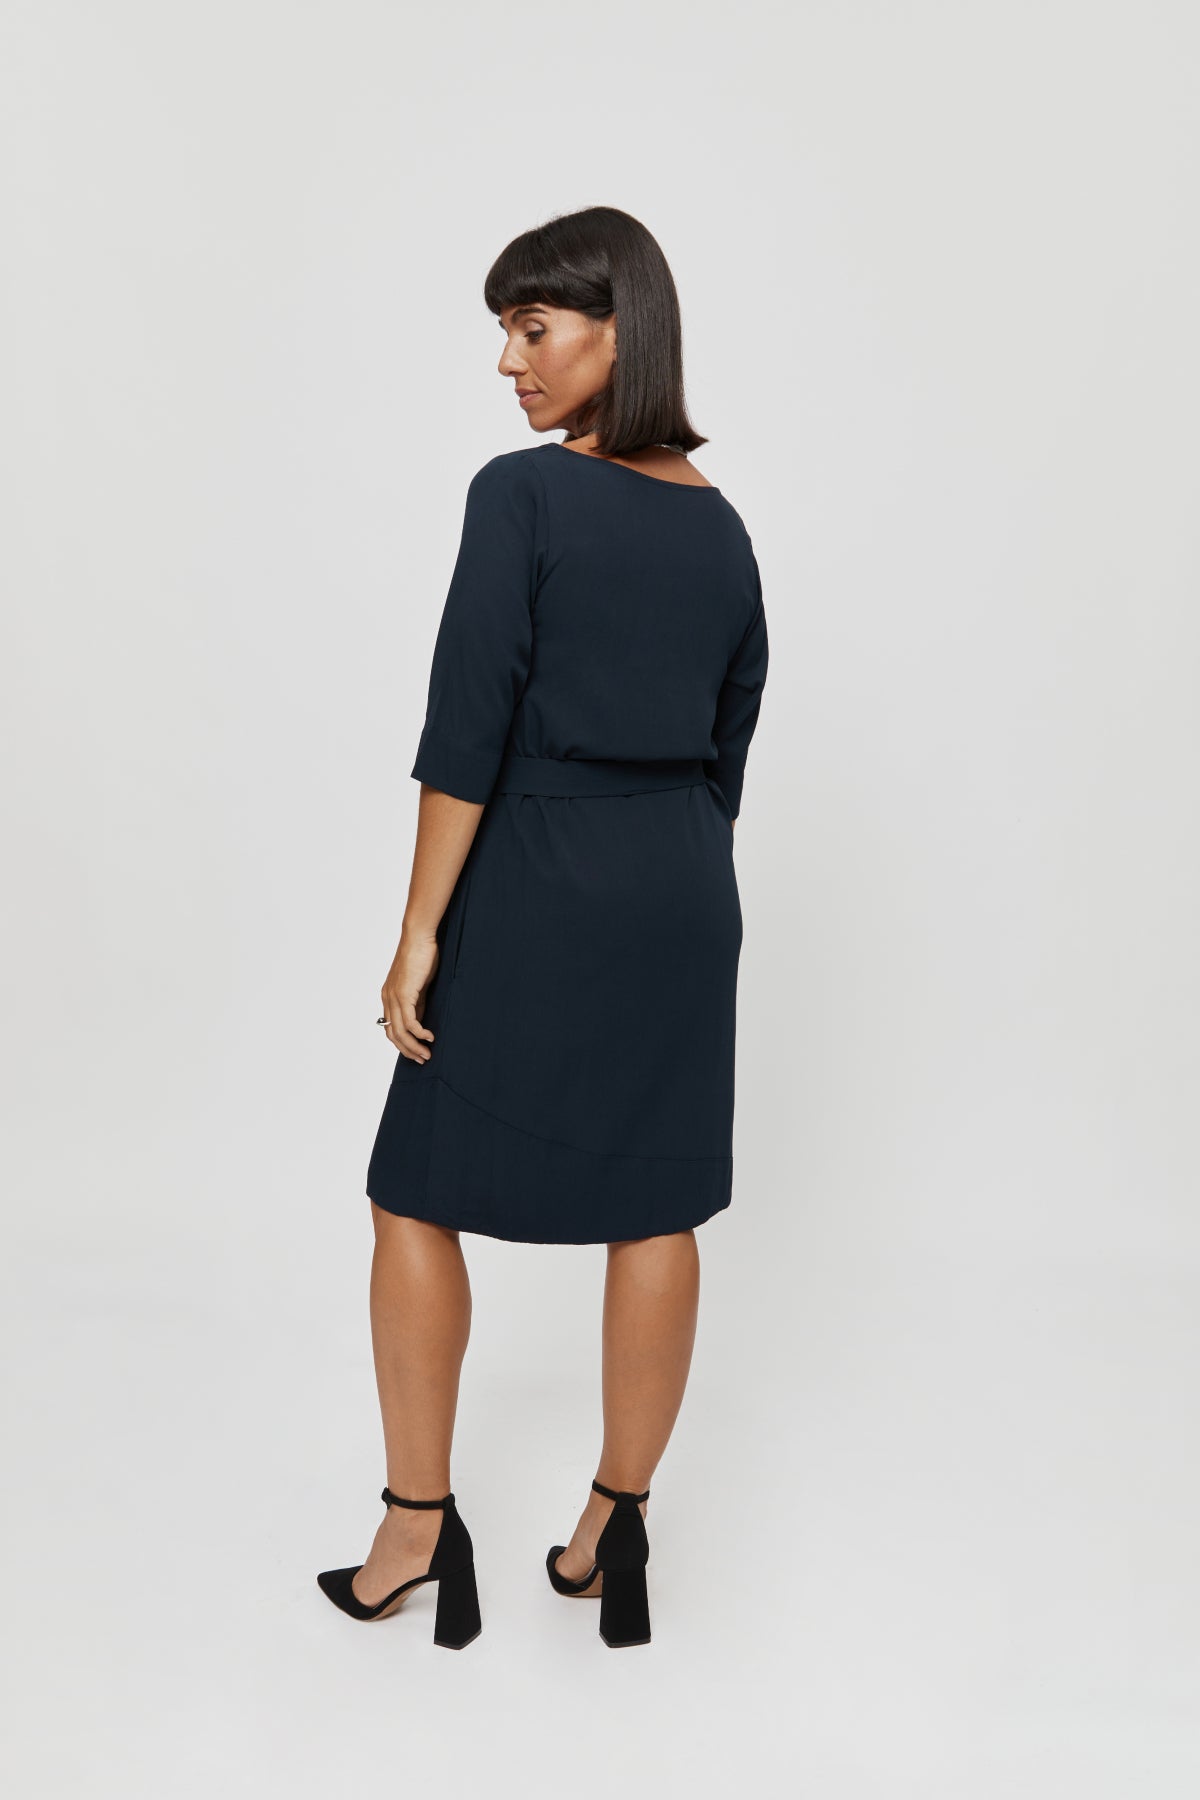 Catherine | Dress in Anthracite with optional belt